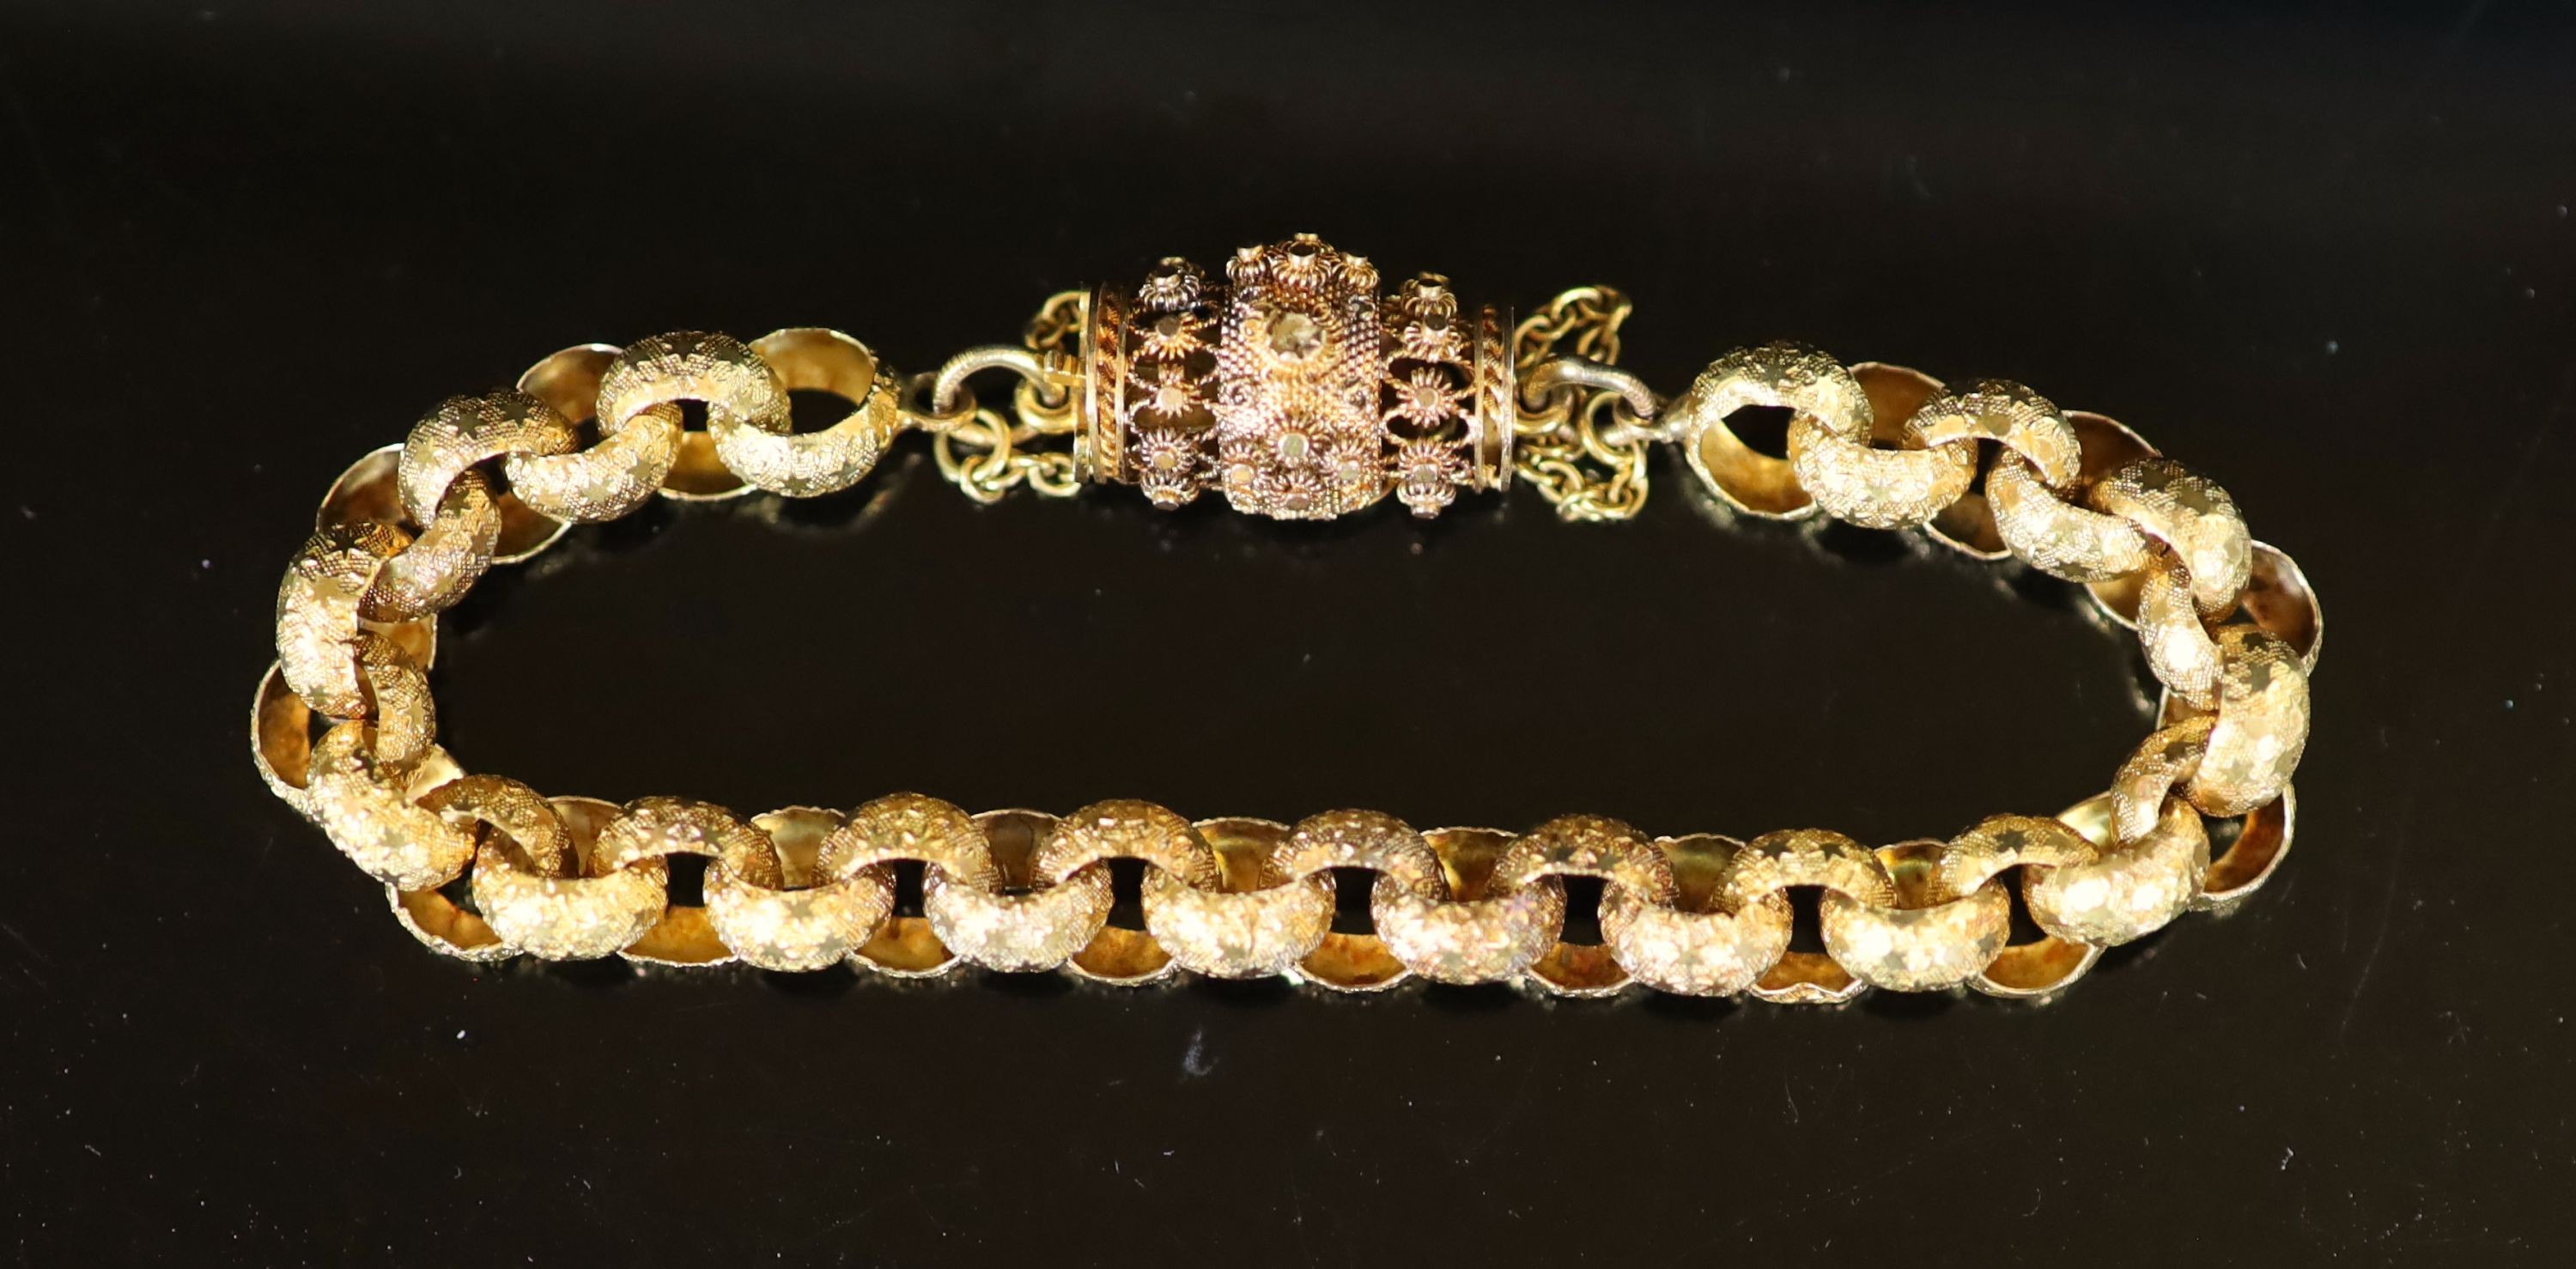 A 19th century star engraved belcher link bracelet, with pierced cannettile work, barrel shaped clasp